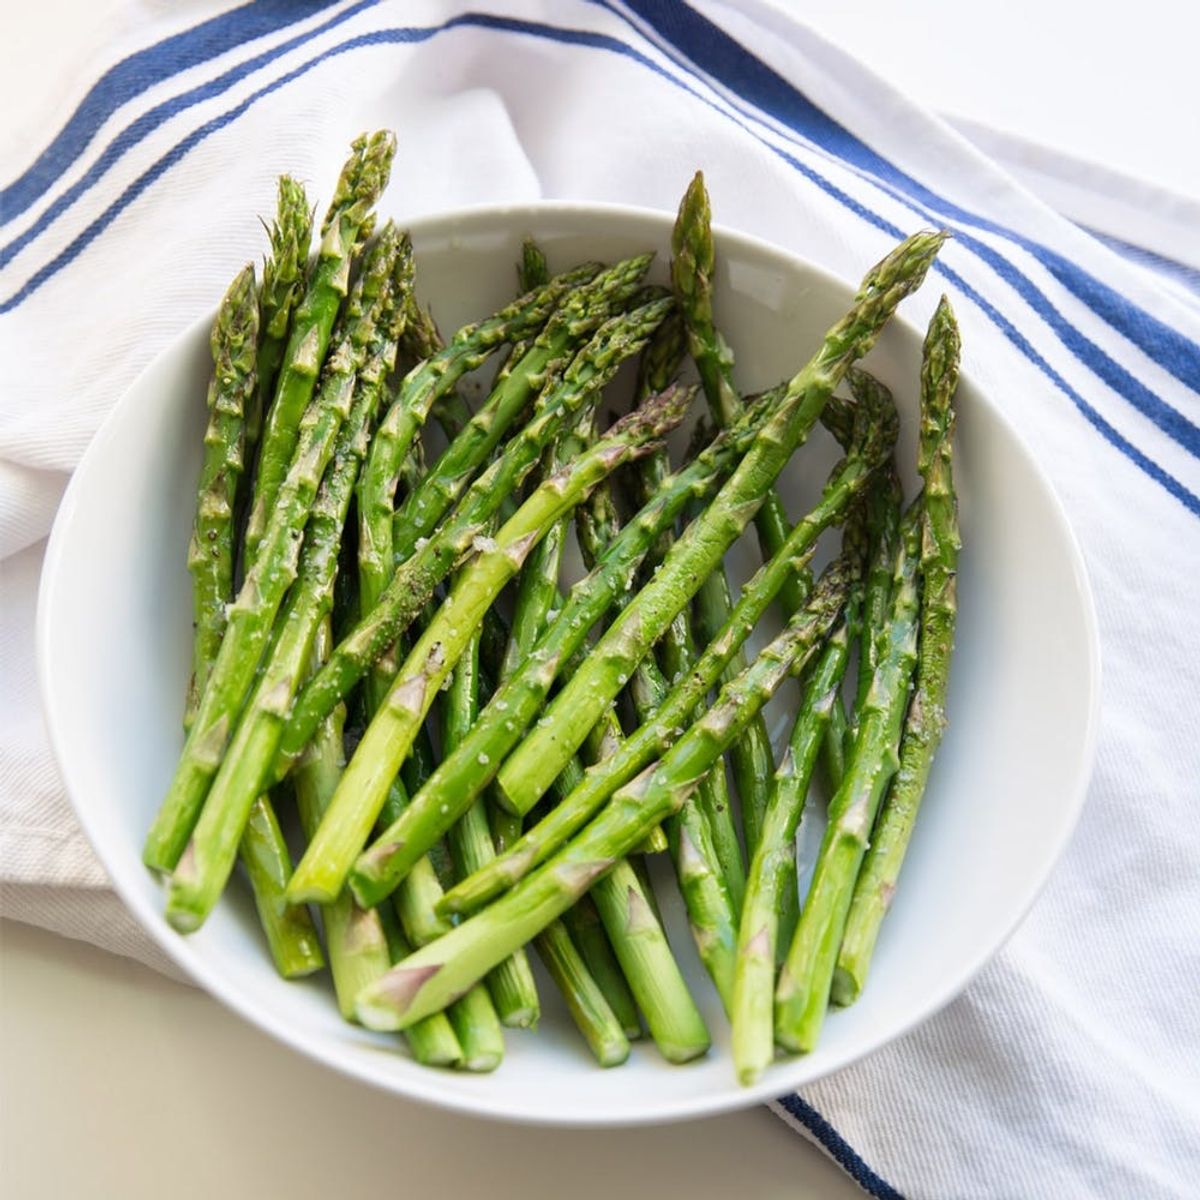 Spring for Greens: How to Make Roasted Asparagus